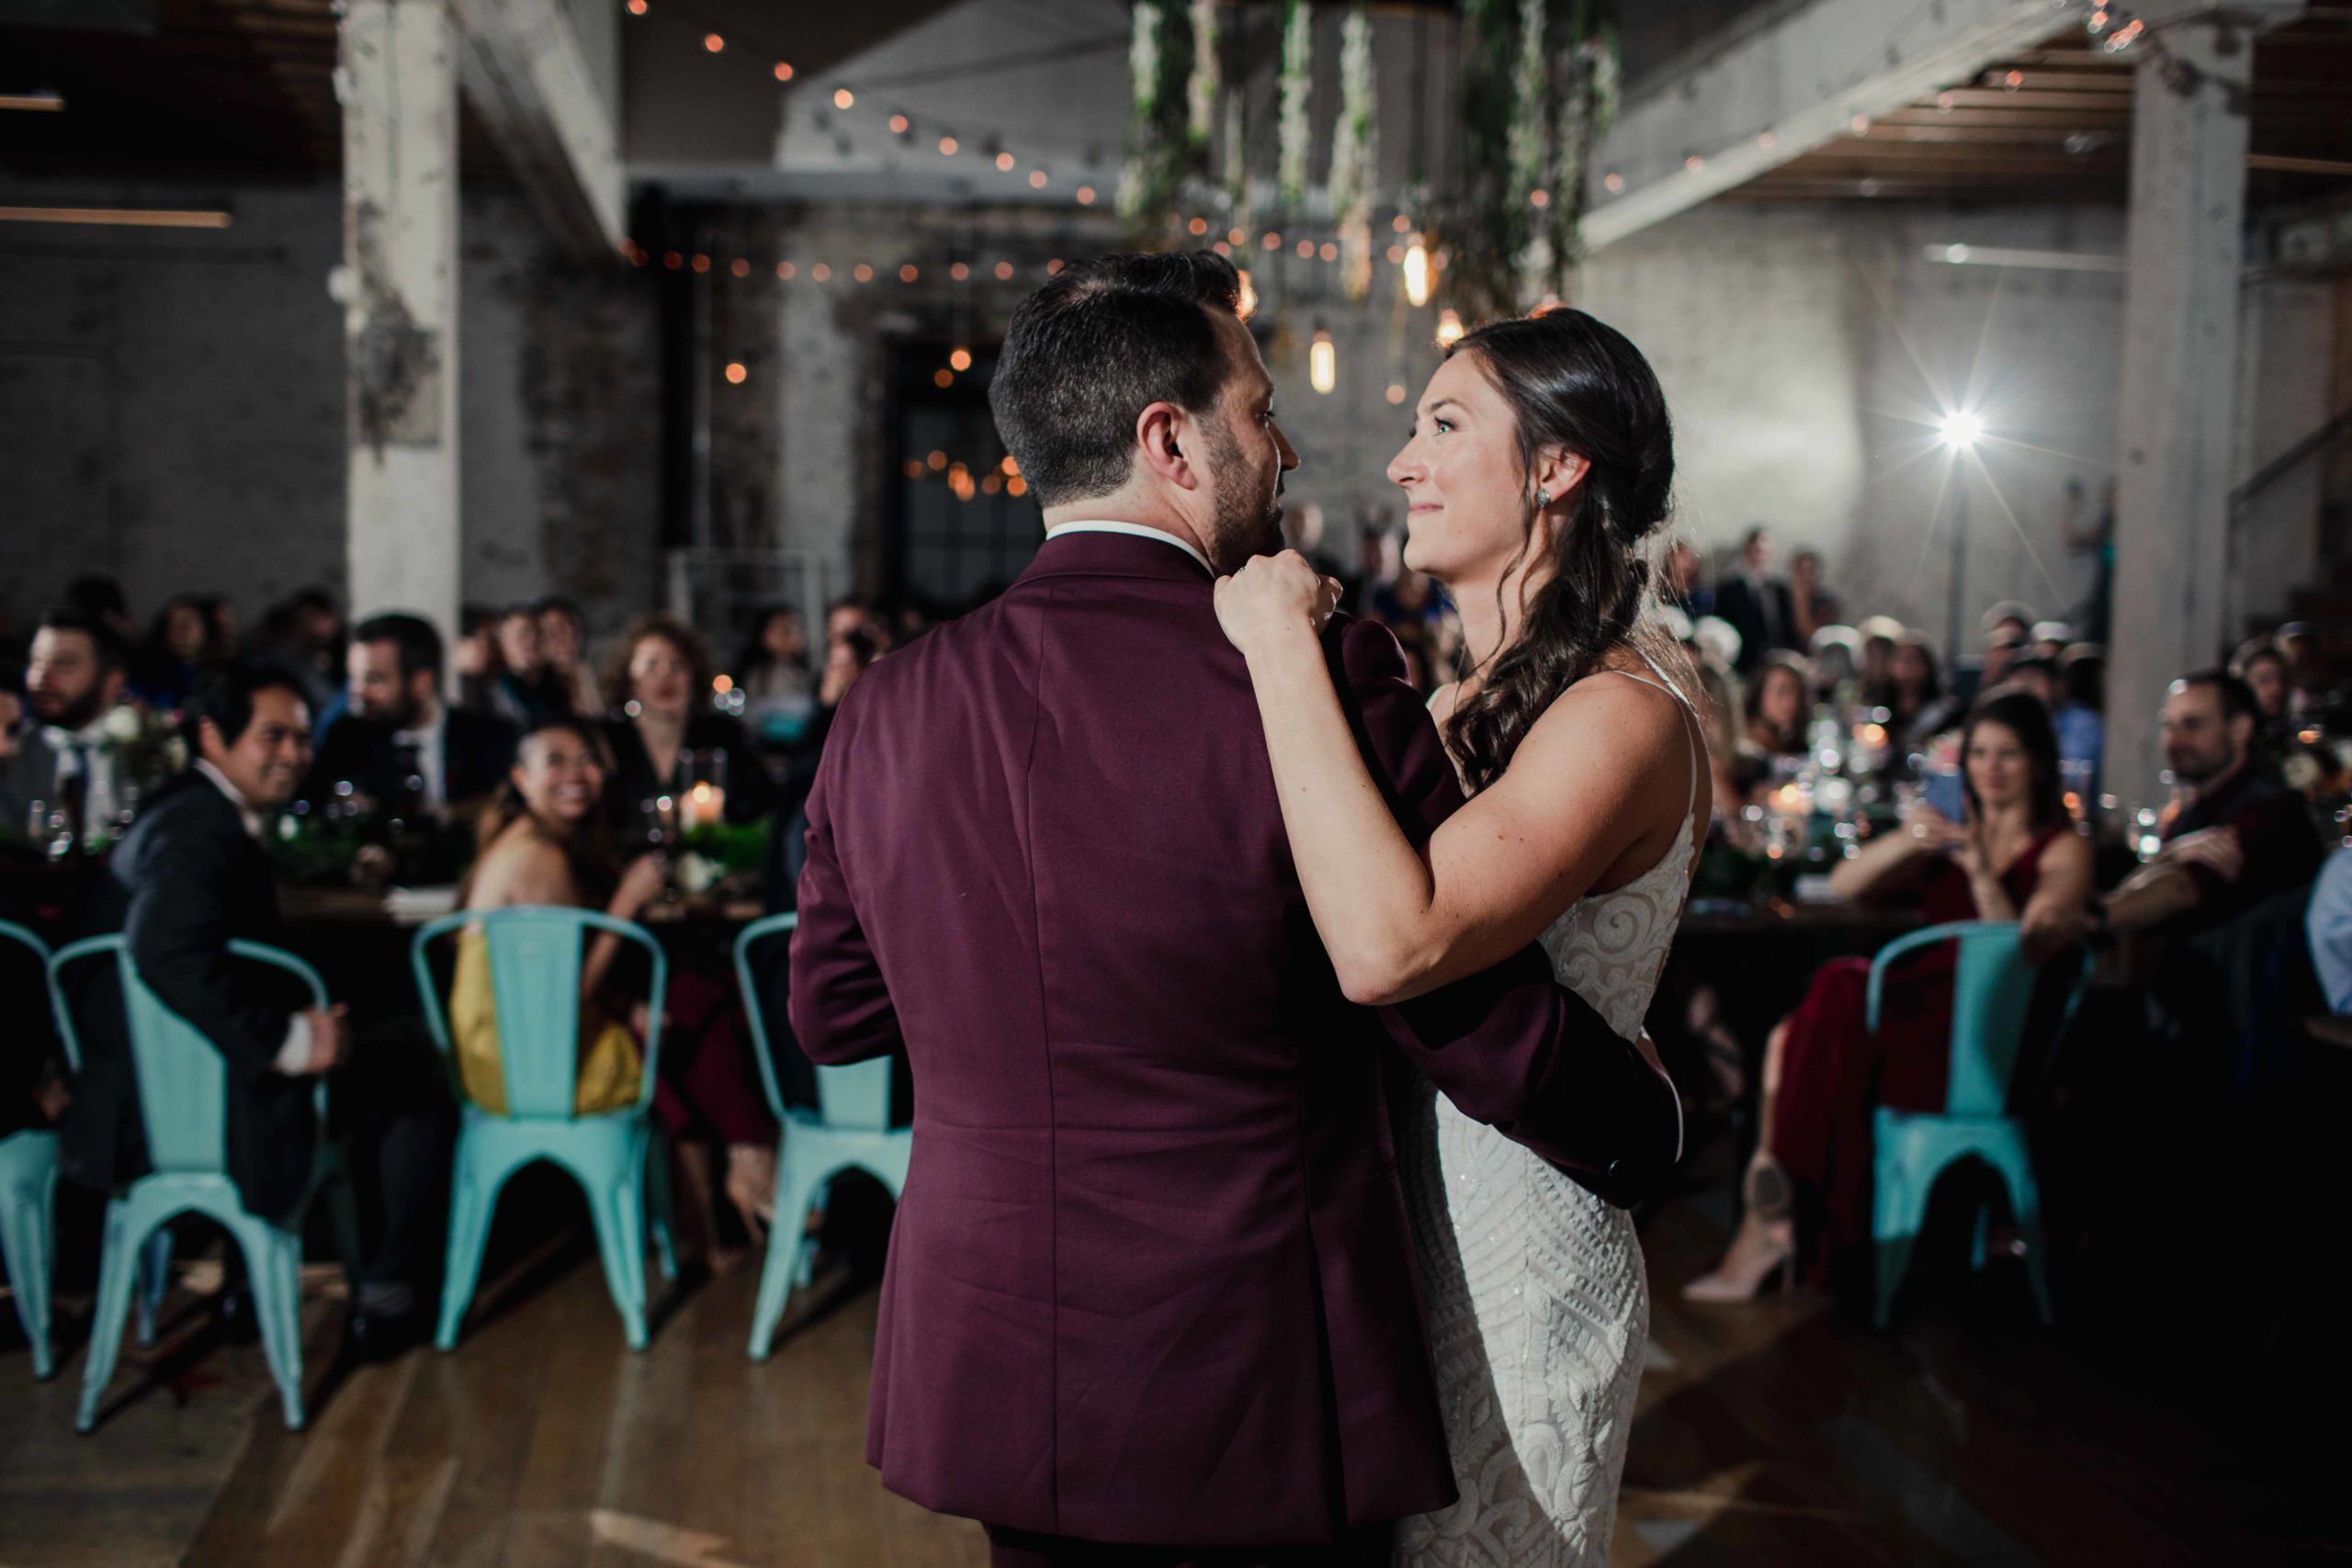 Chicago Illinois Wedding Photography first dance at the Joinery venue